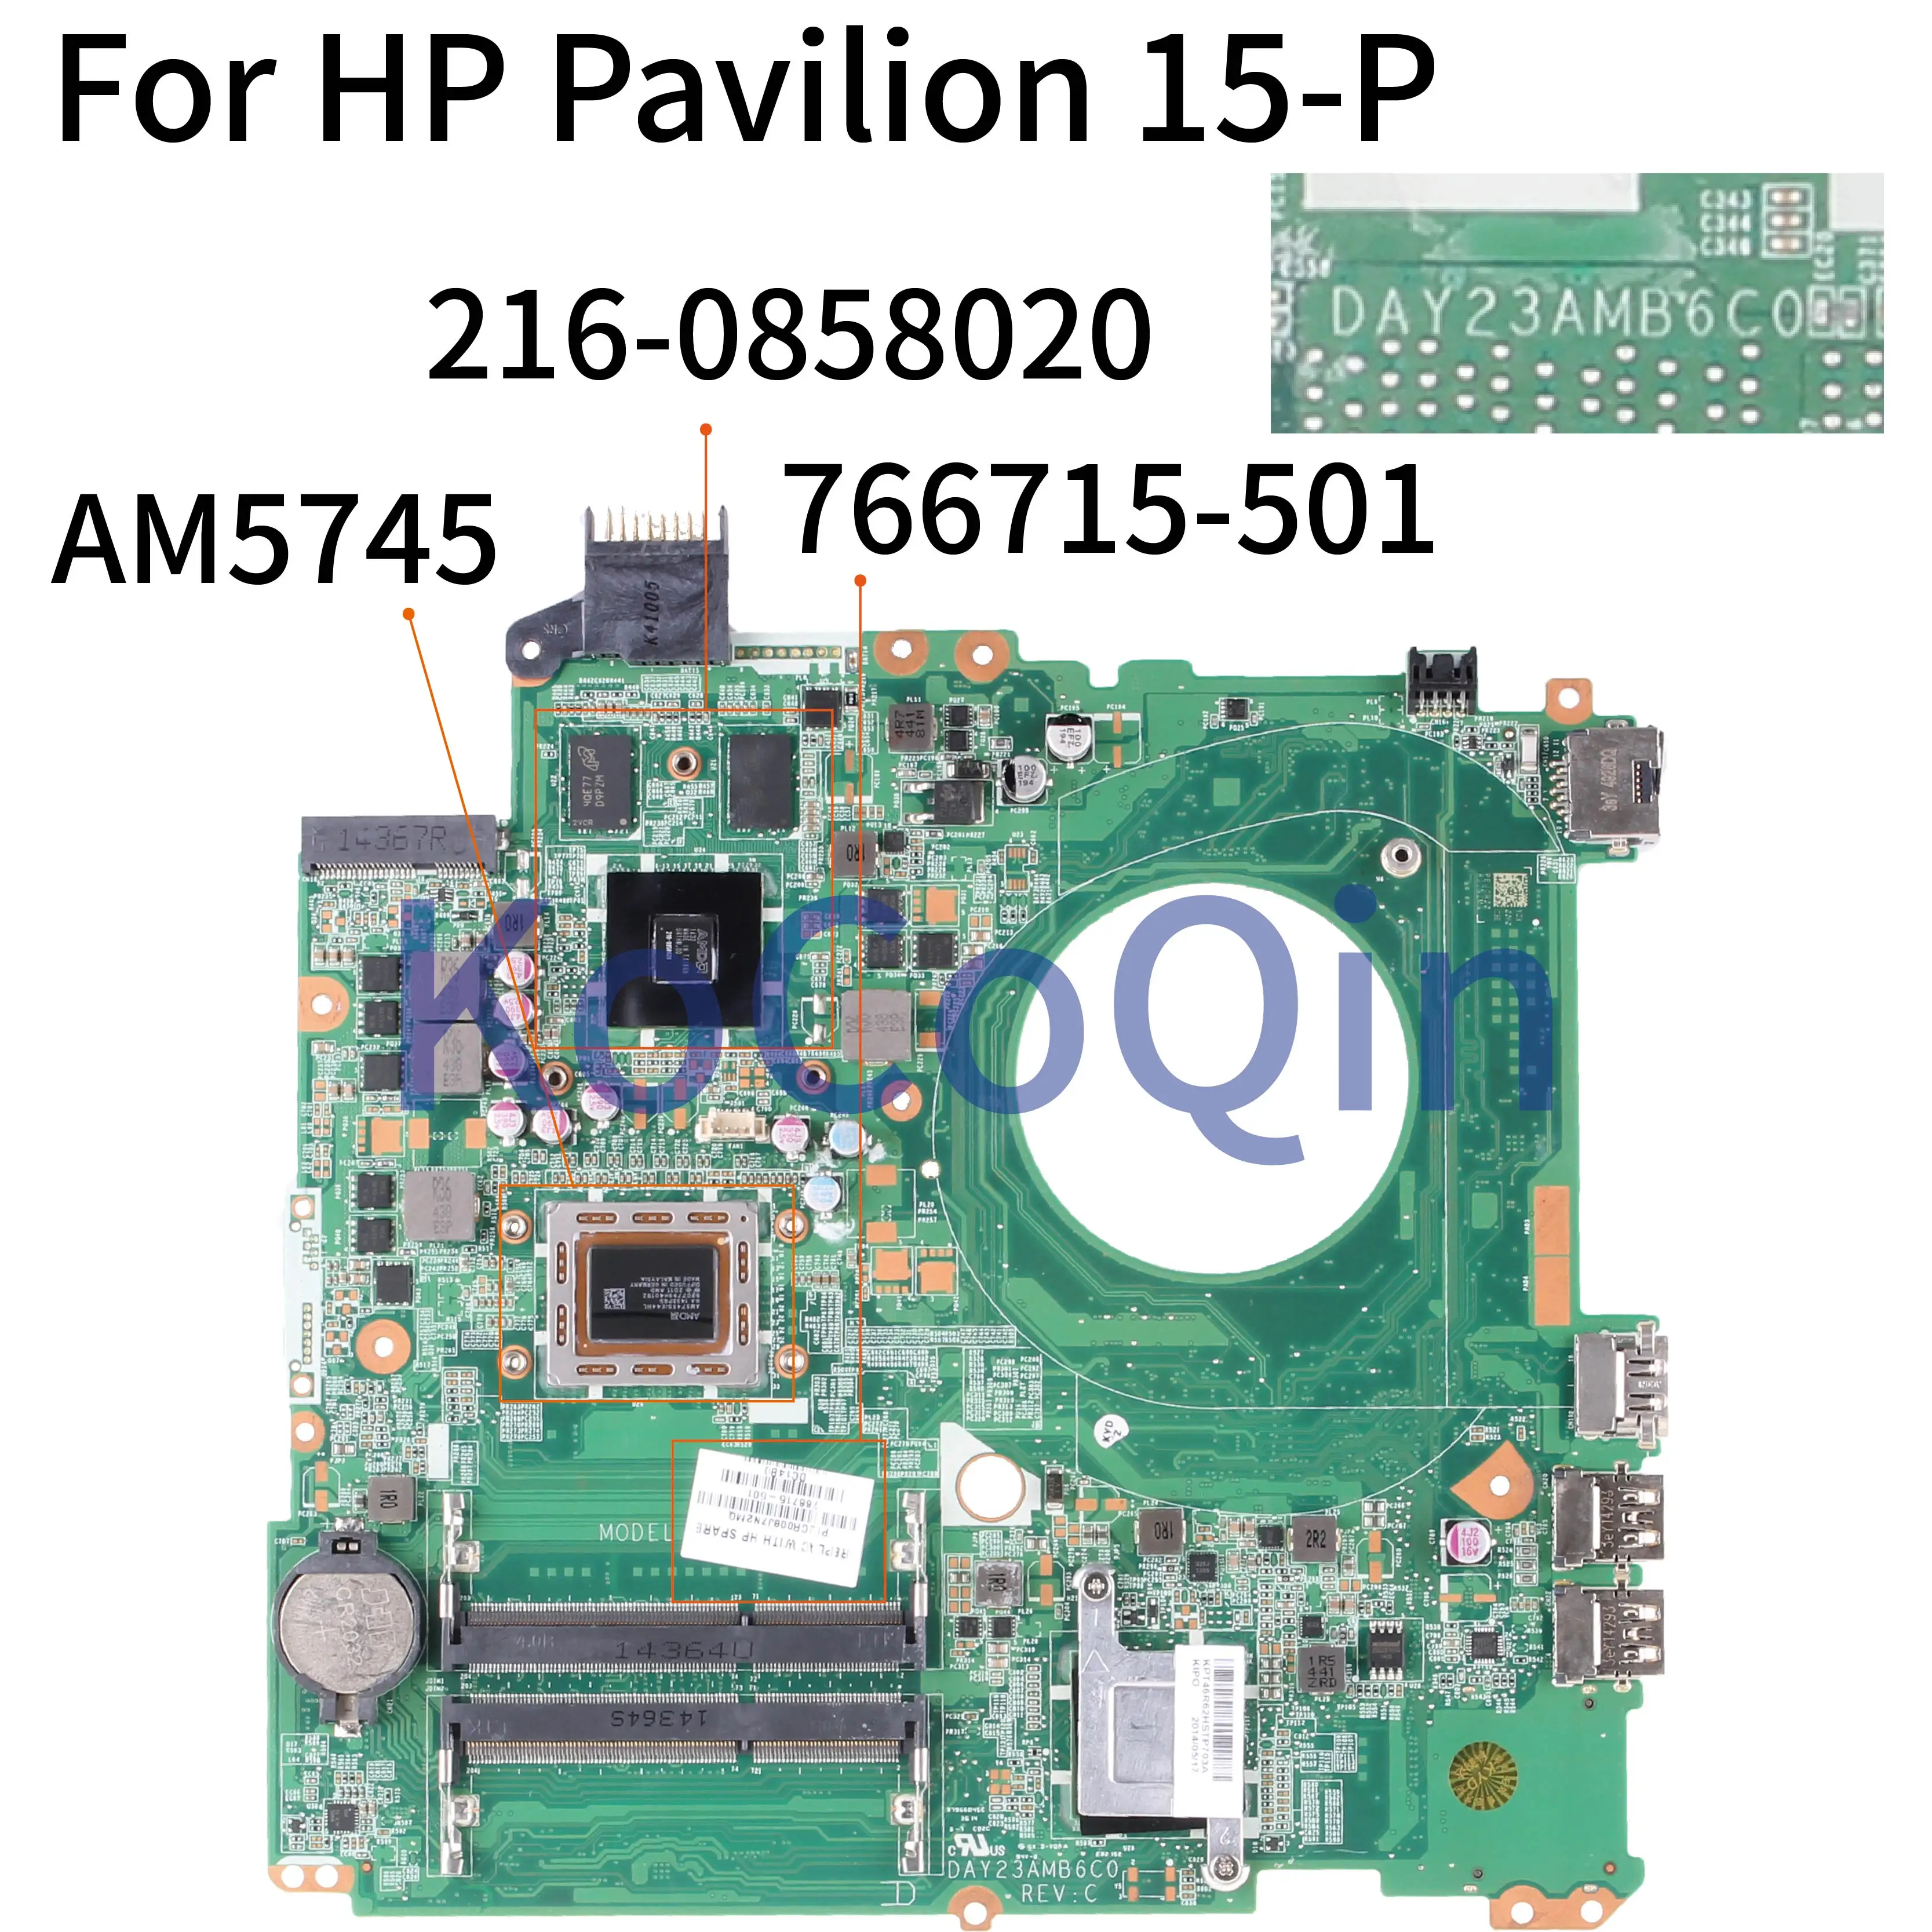 Great Value  KoCoQin Laptop motherboard For HP Pavilion 15-P Series AM5745 216-0858020 Mainboard 766715-001 7667